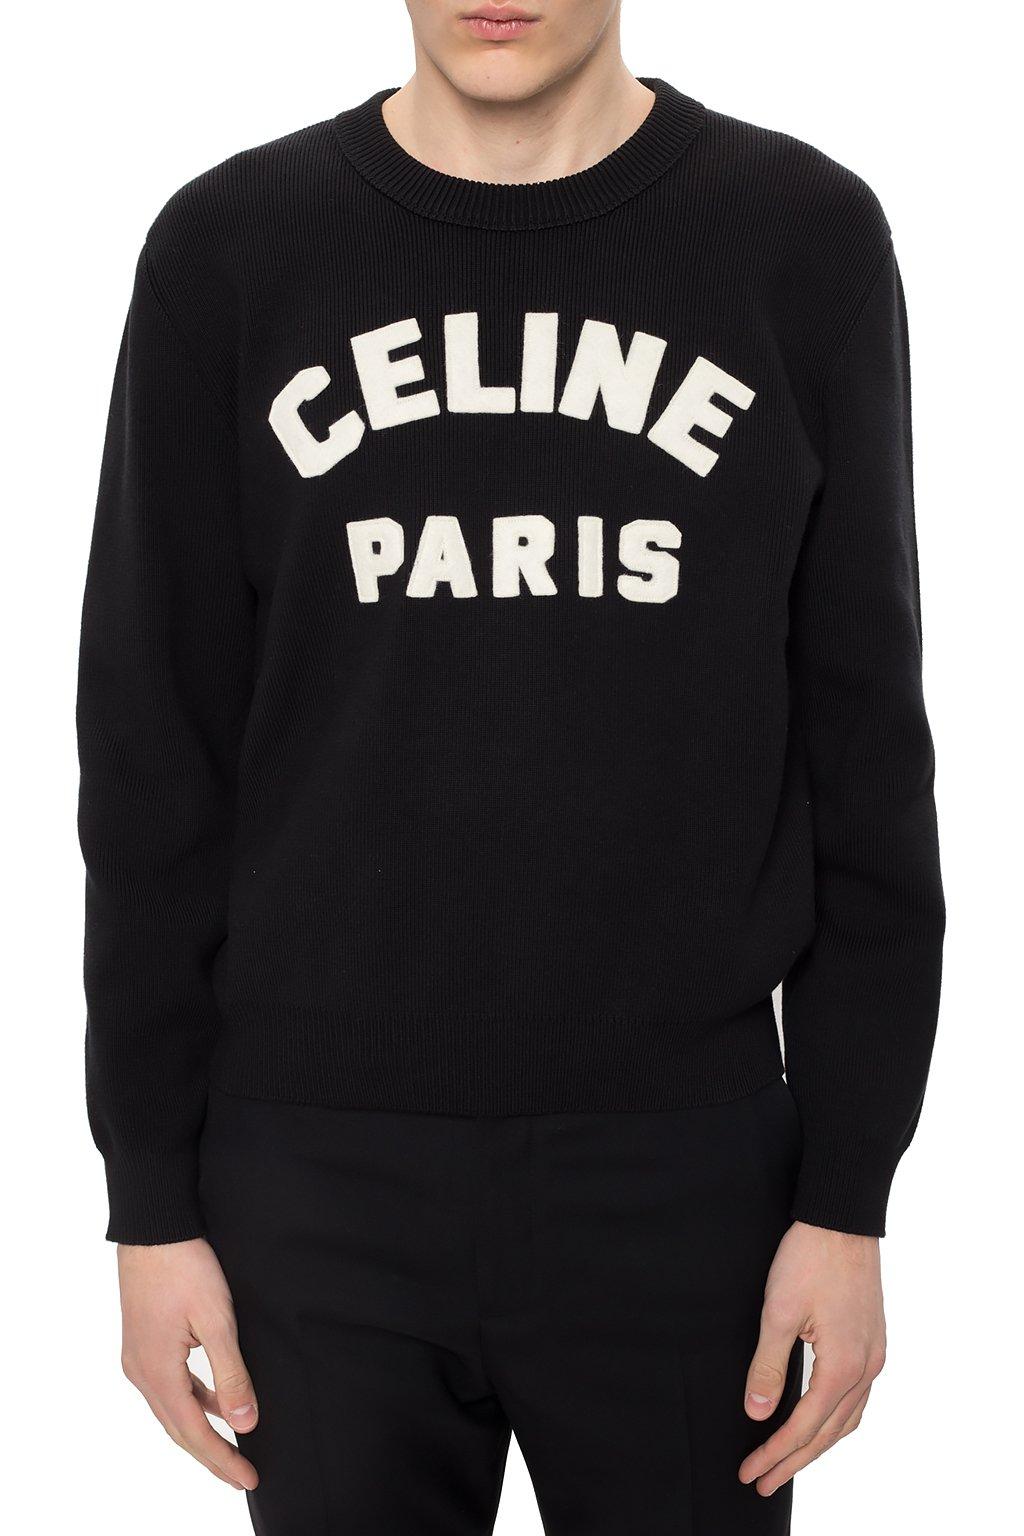 Celine Cotton Sweater With Logo in Black for Men - Lyst